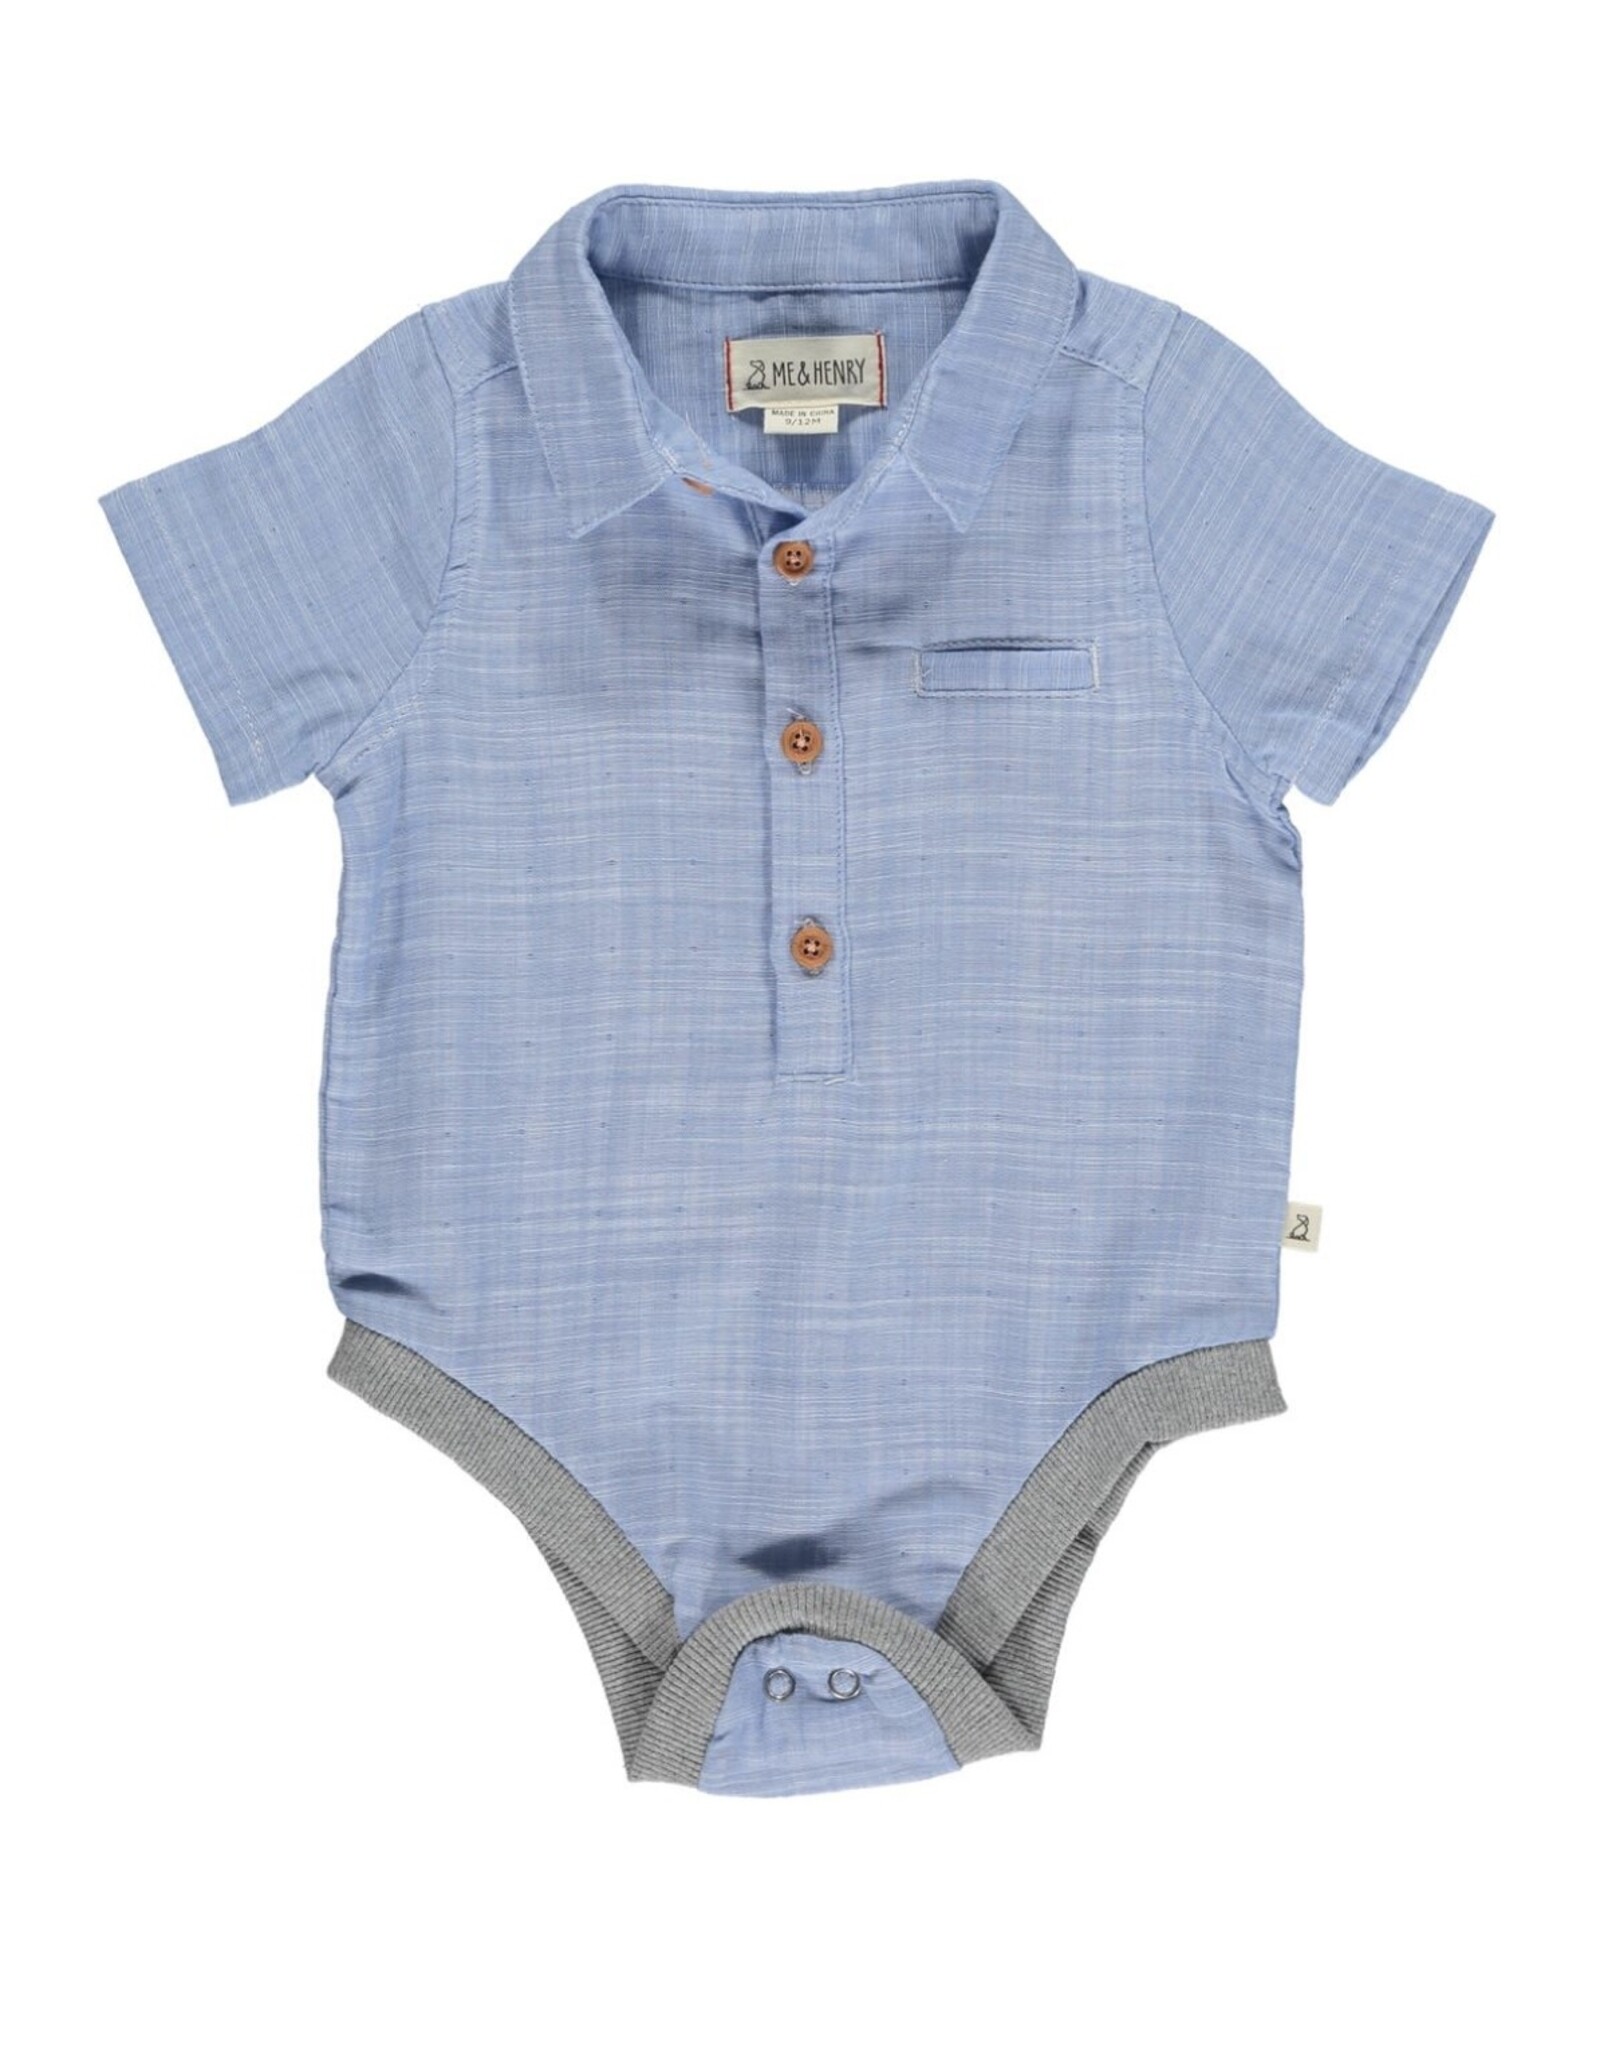 Me & Henry Me & Henry- Helford Woven Onesie: Chambray